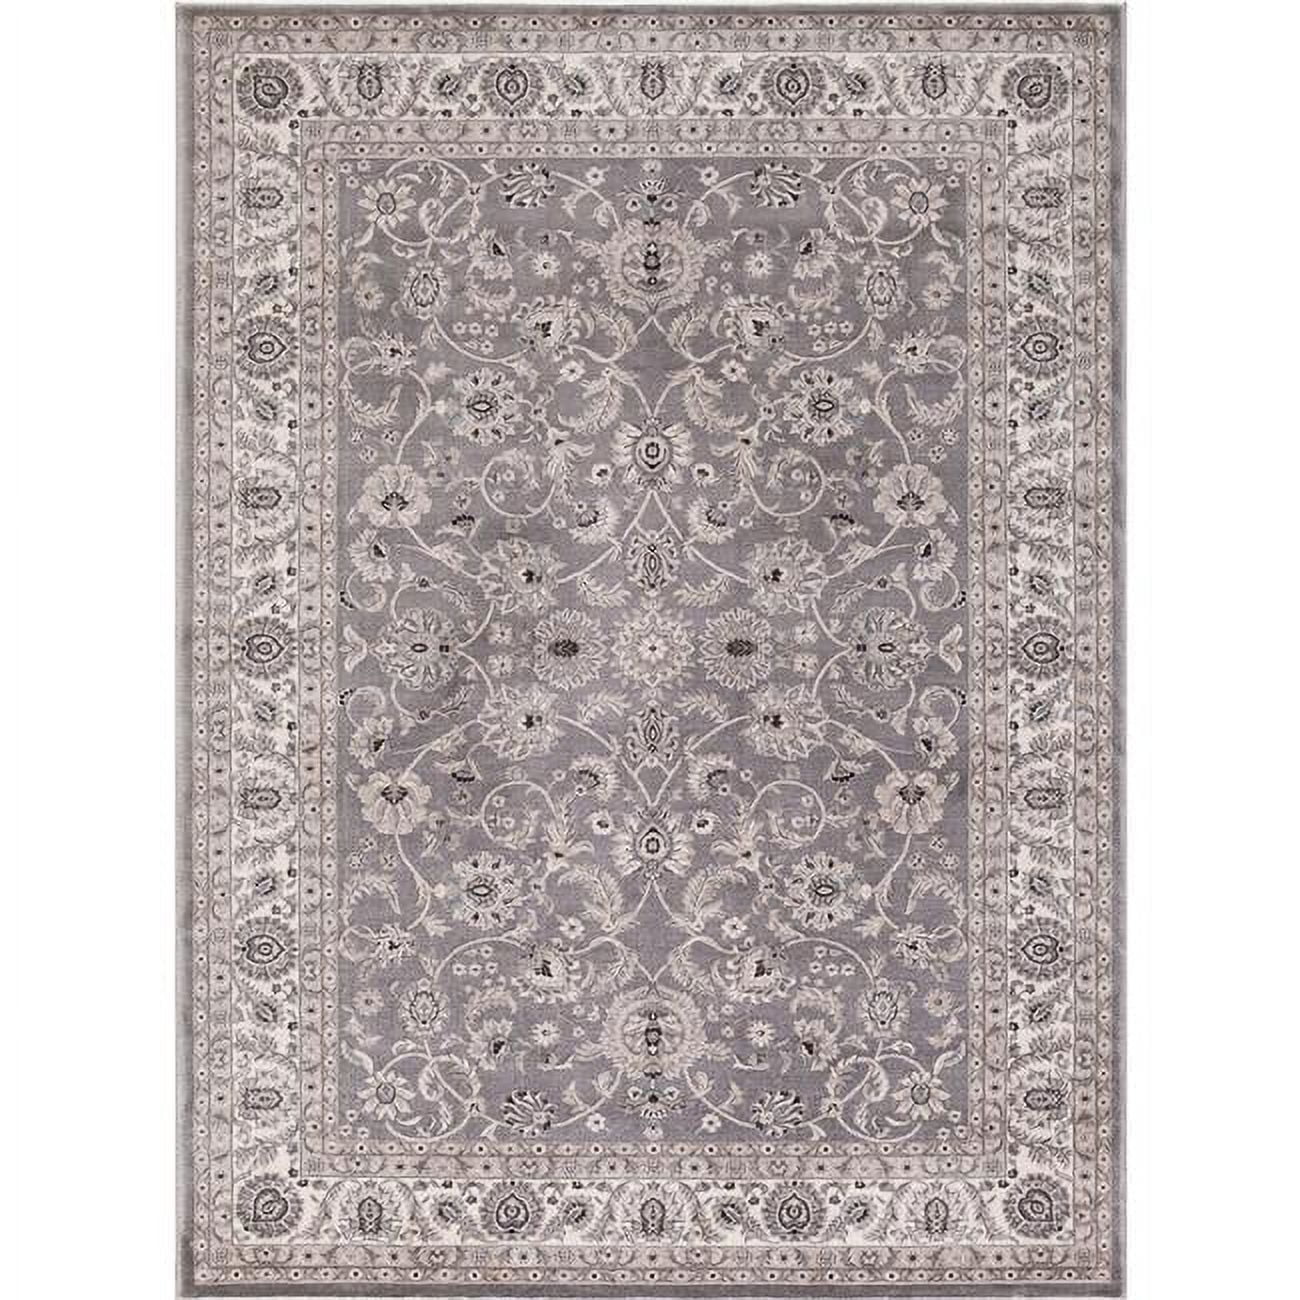 Picture of Concord Global 28164 3 ft. 3 in. x 4 ft. 7 in. Kashan Bergama - Grey